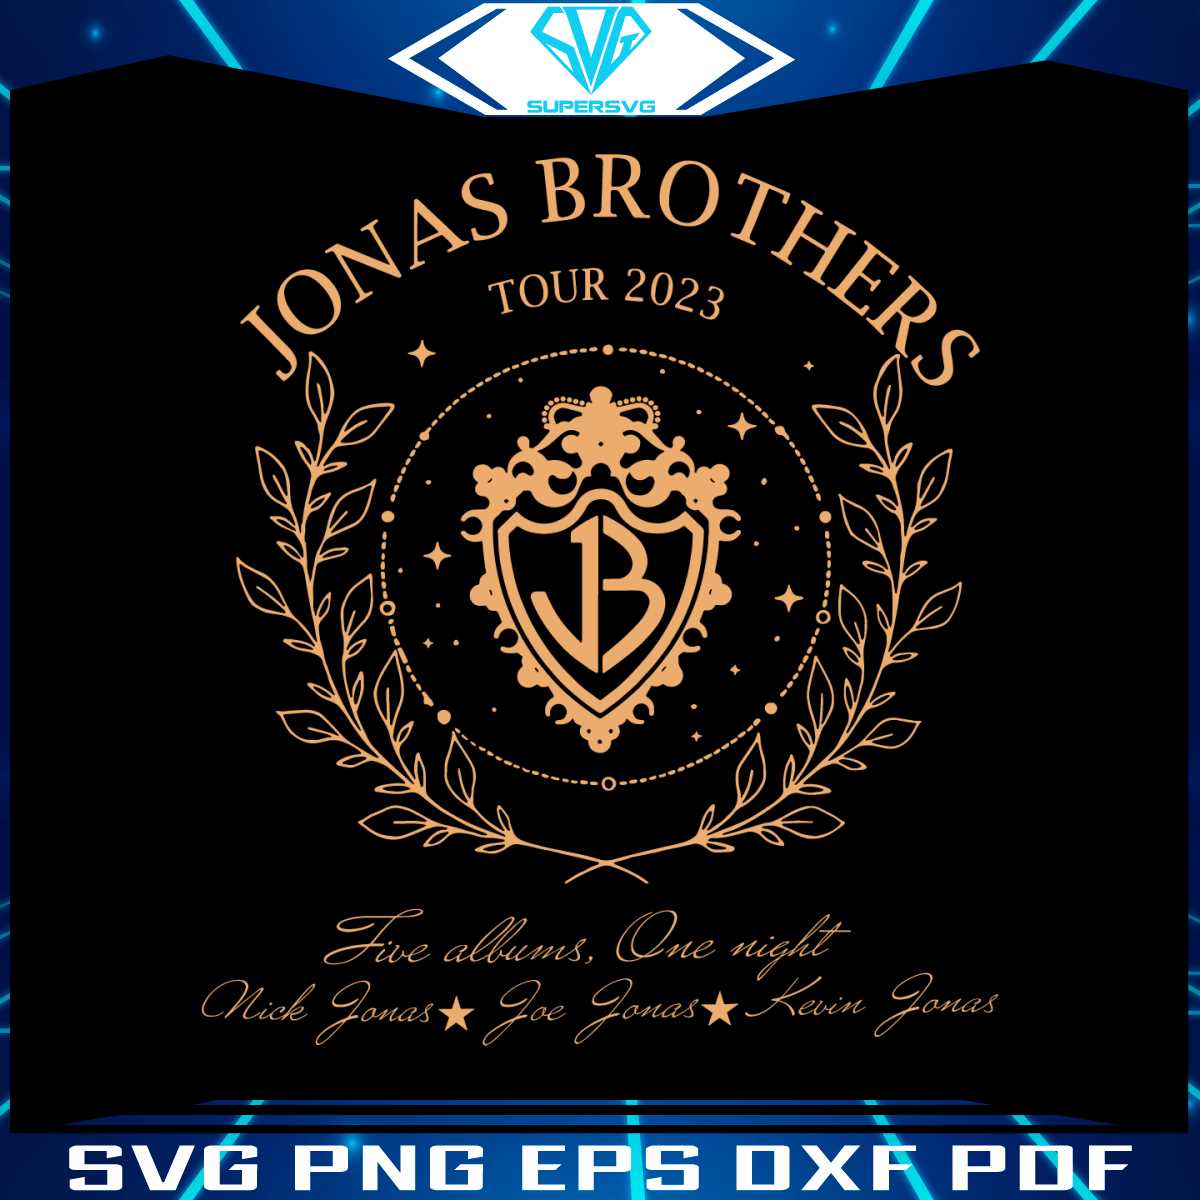 jonas-brothers-member-five-albums-one-night-tour-svg-file